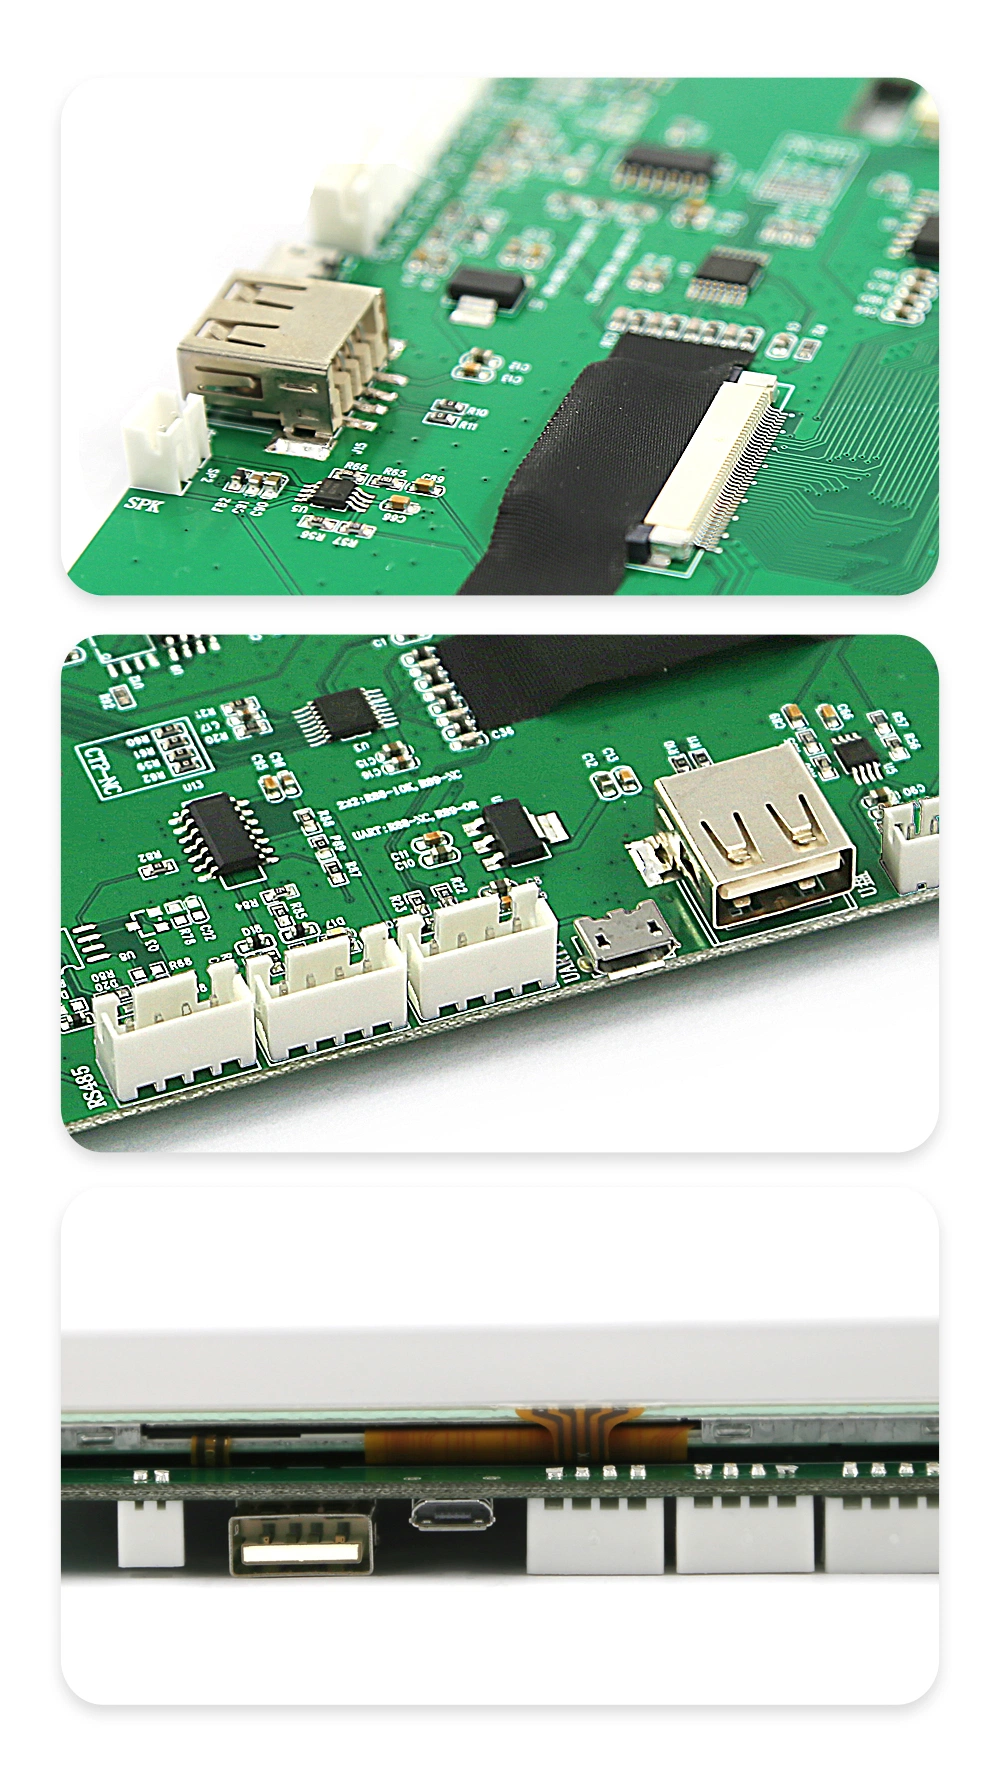 Uart Interface Custom Design 5 Inch Control Panel Available